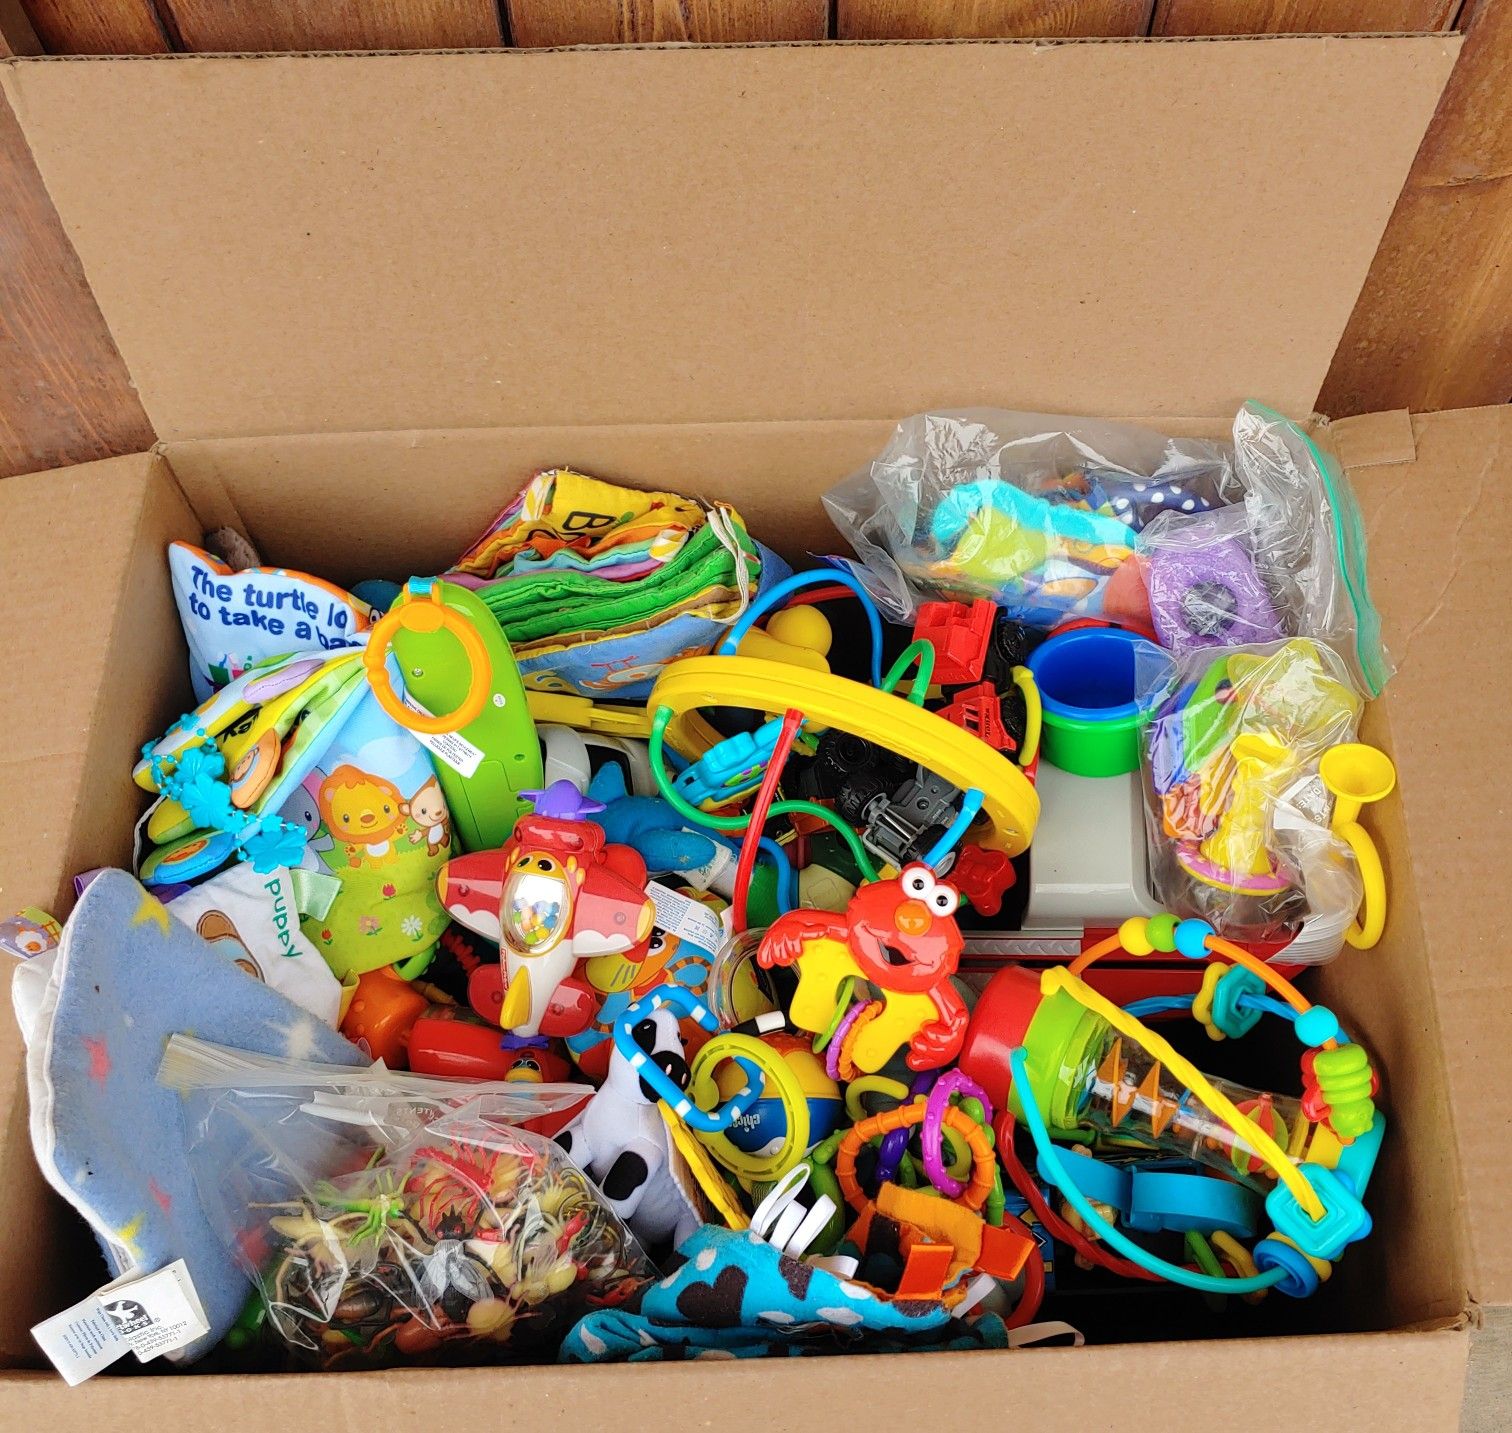 FREE - Box of Toys - PENDING PICK UP